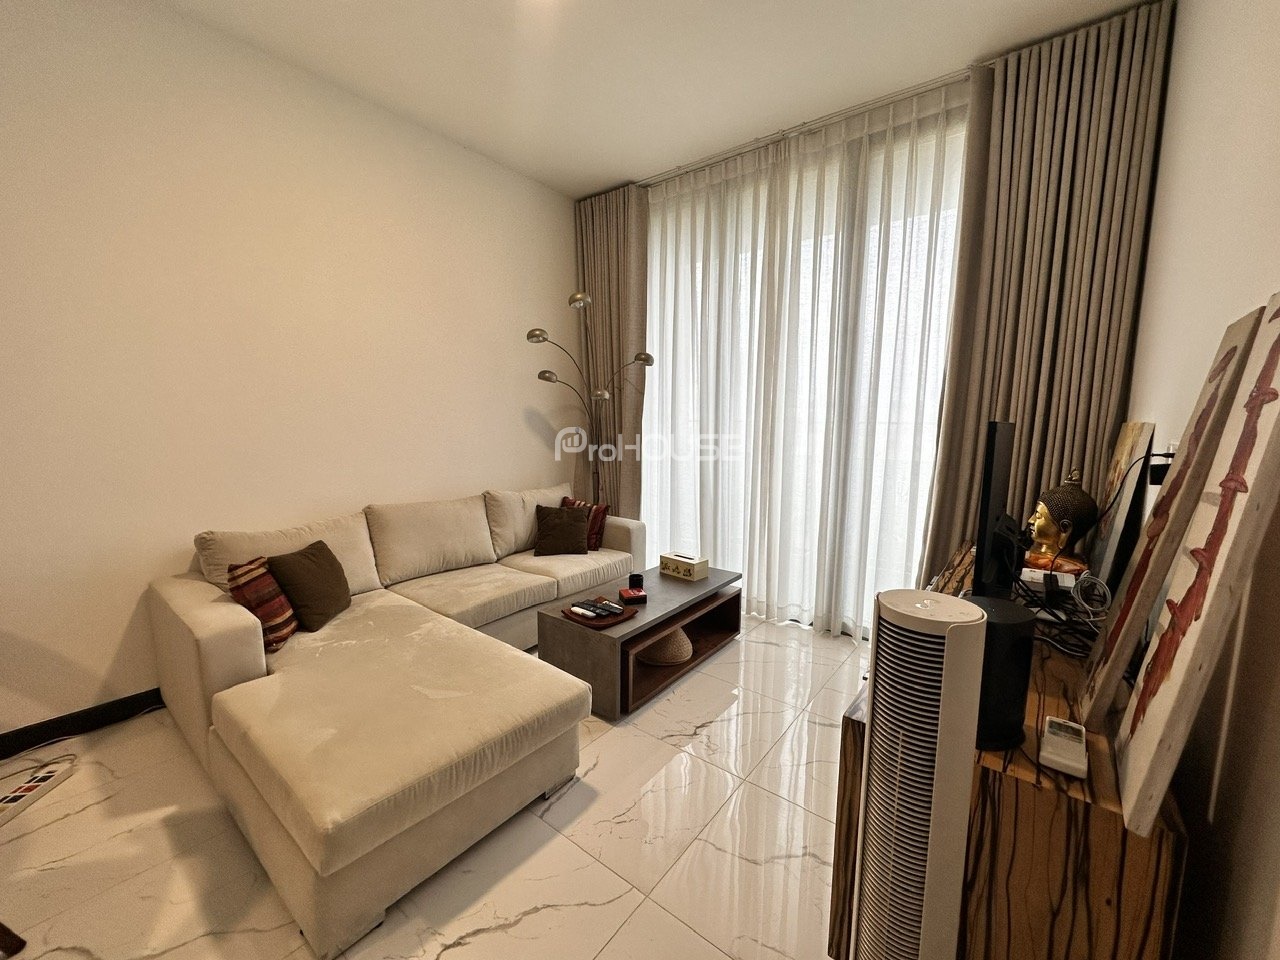 Empire City 1-bedroom apartment for rent with luxurious furniture